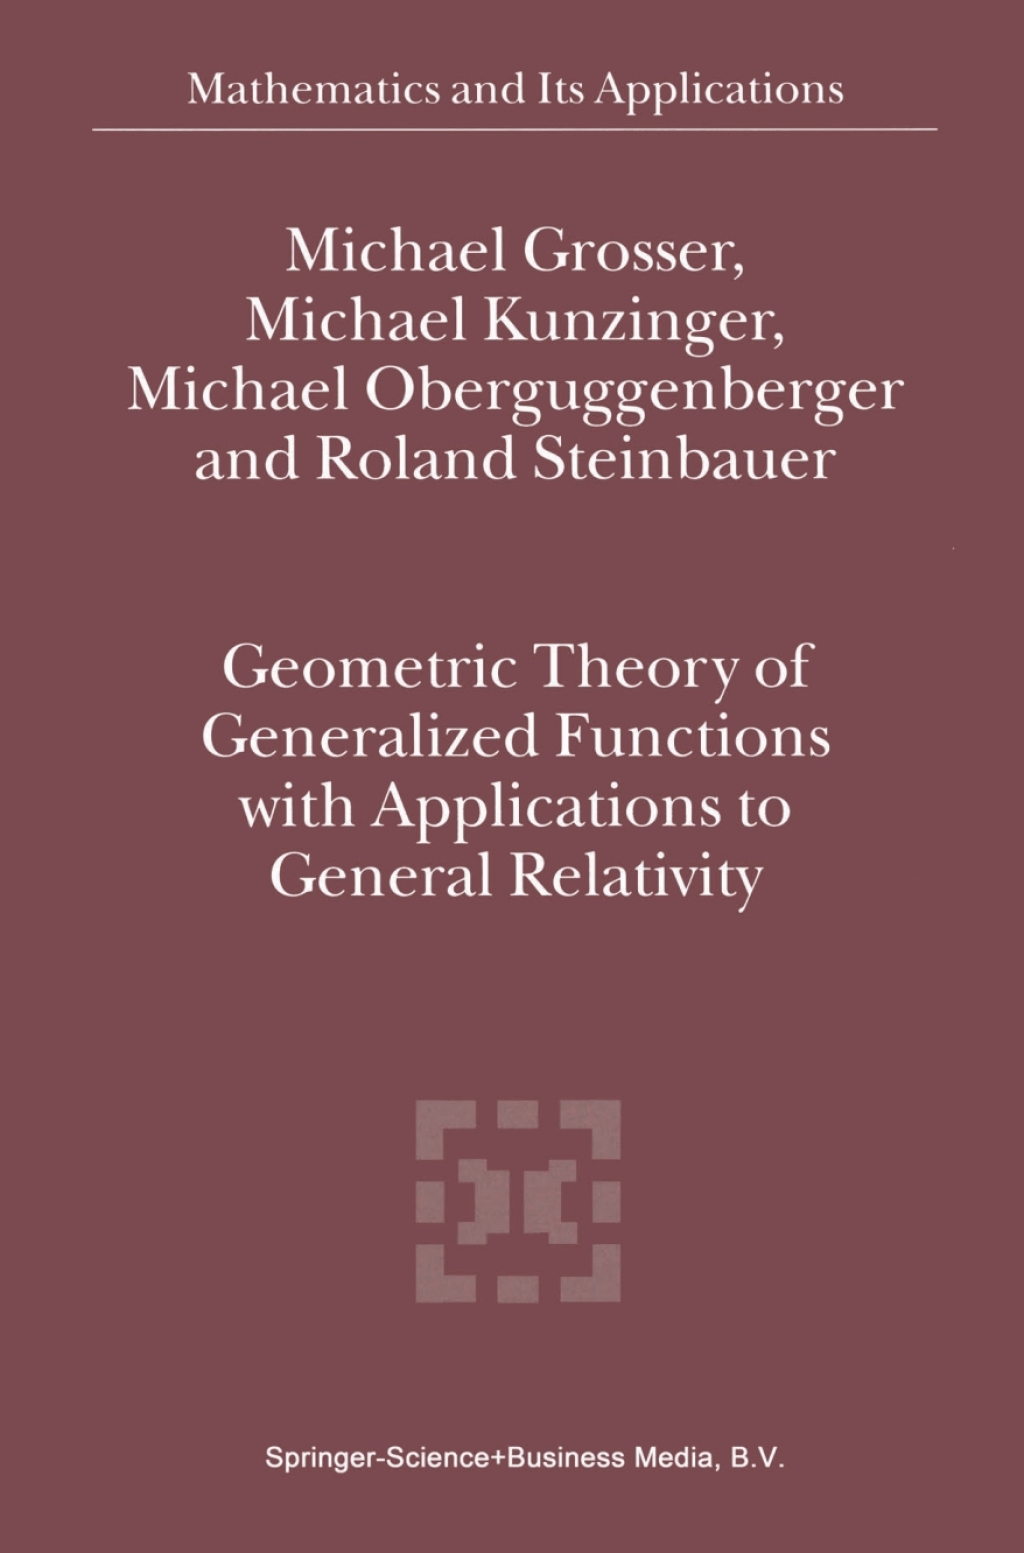 Geometric Theory of Generalized Functions with Applications to General Relativity (eBook) - M. Grosser; M. Kunzinger; Michael Oberguggenberger; R. Steinbauer,